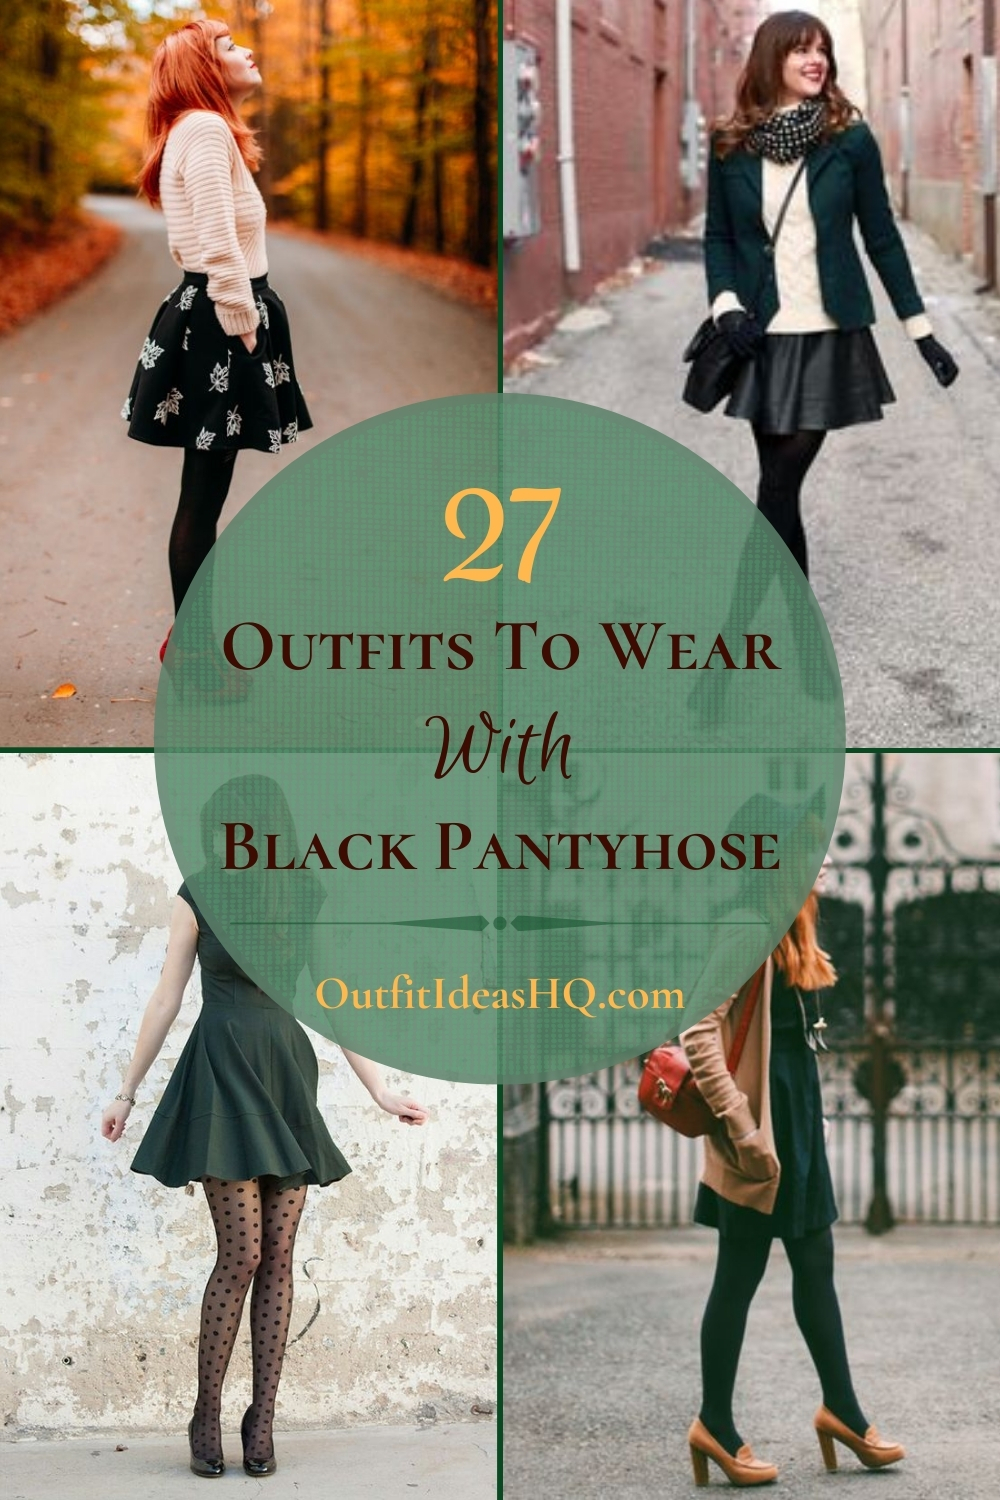 How To Wear Leggings Or Tights Under Dress